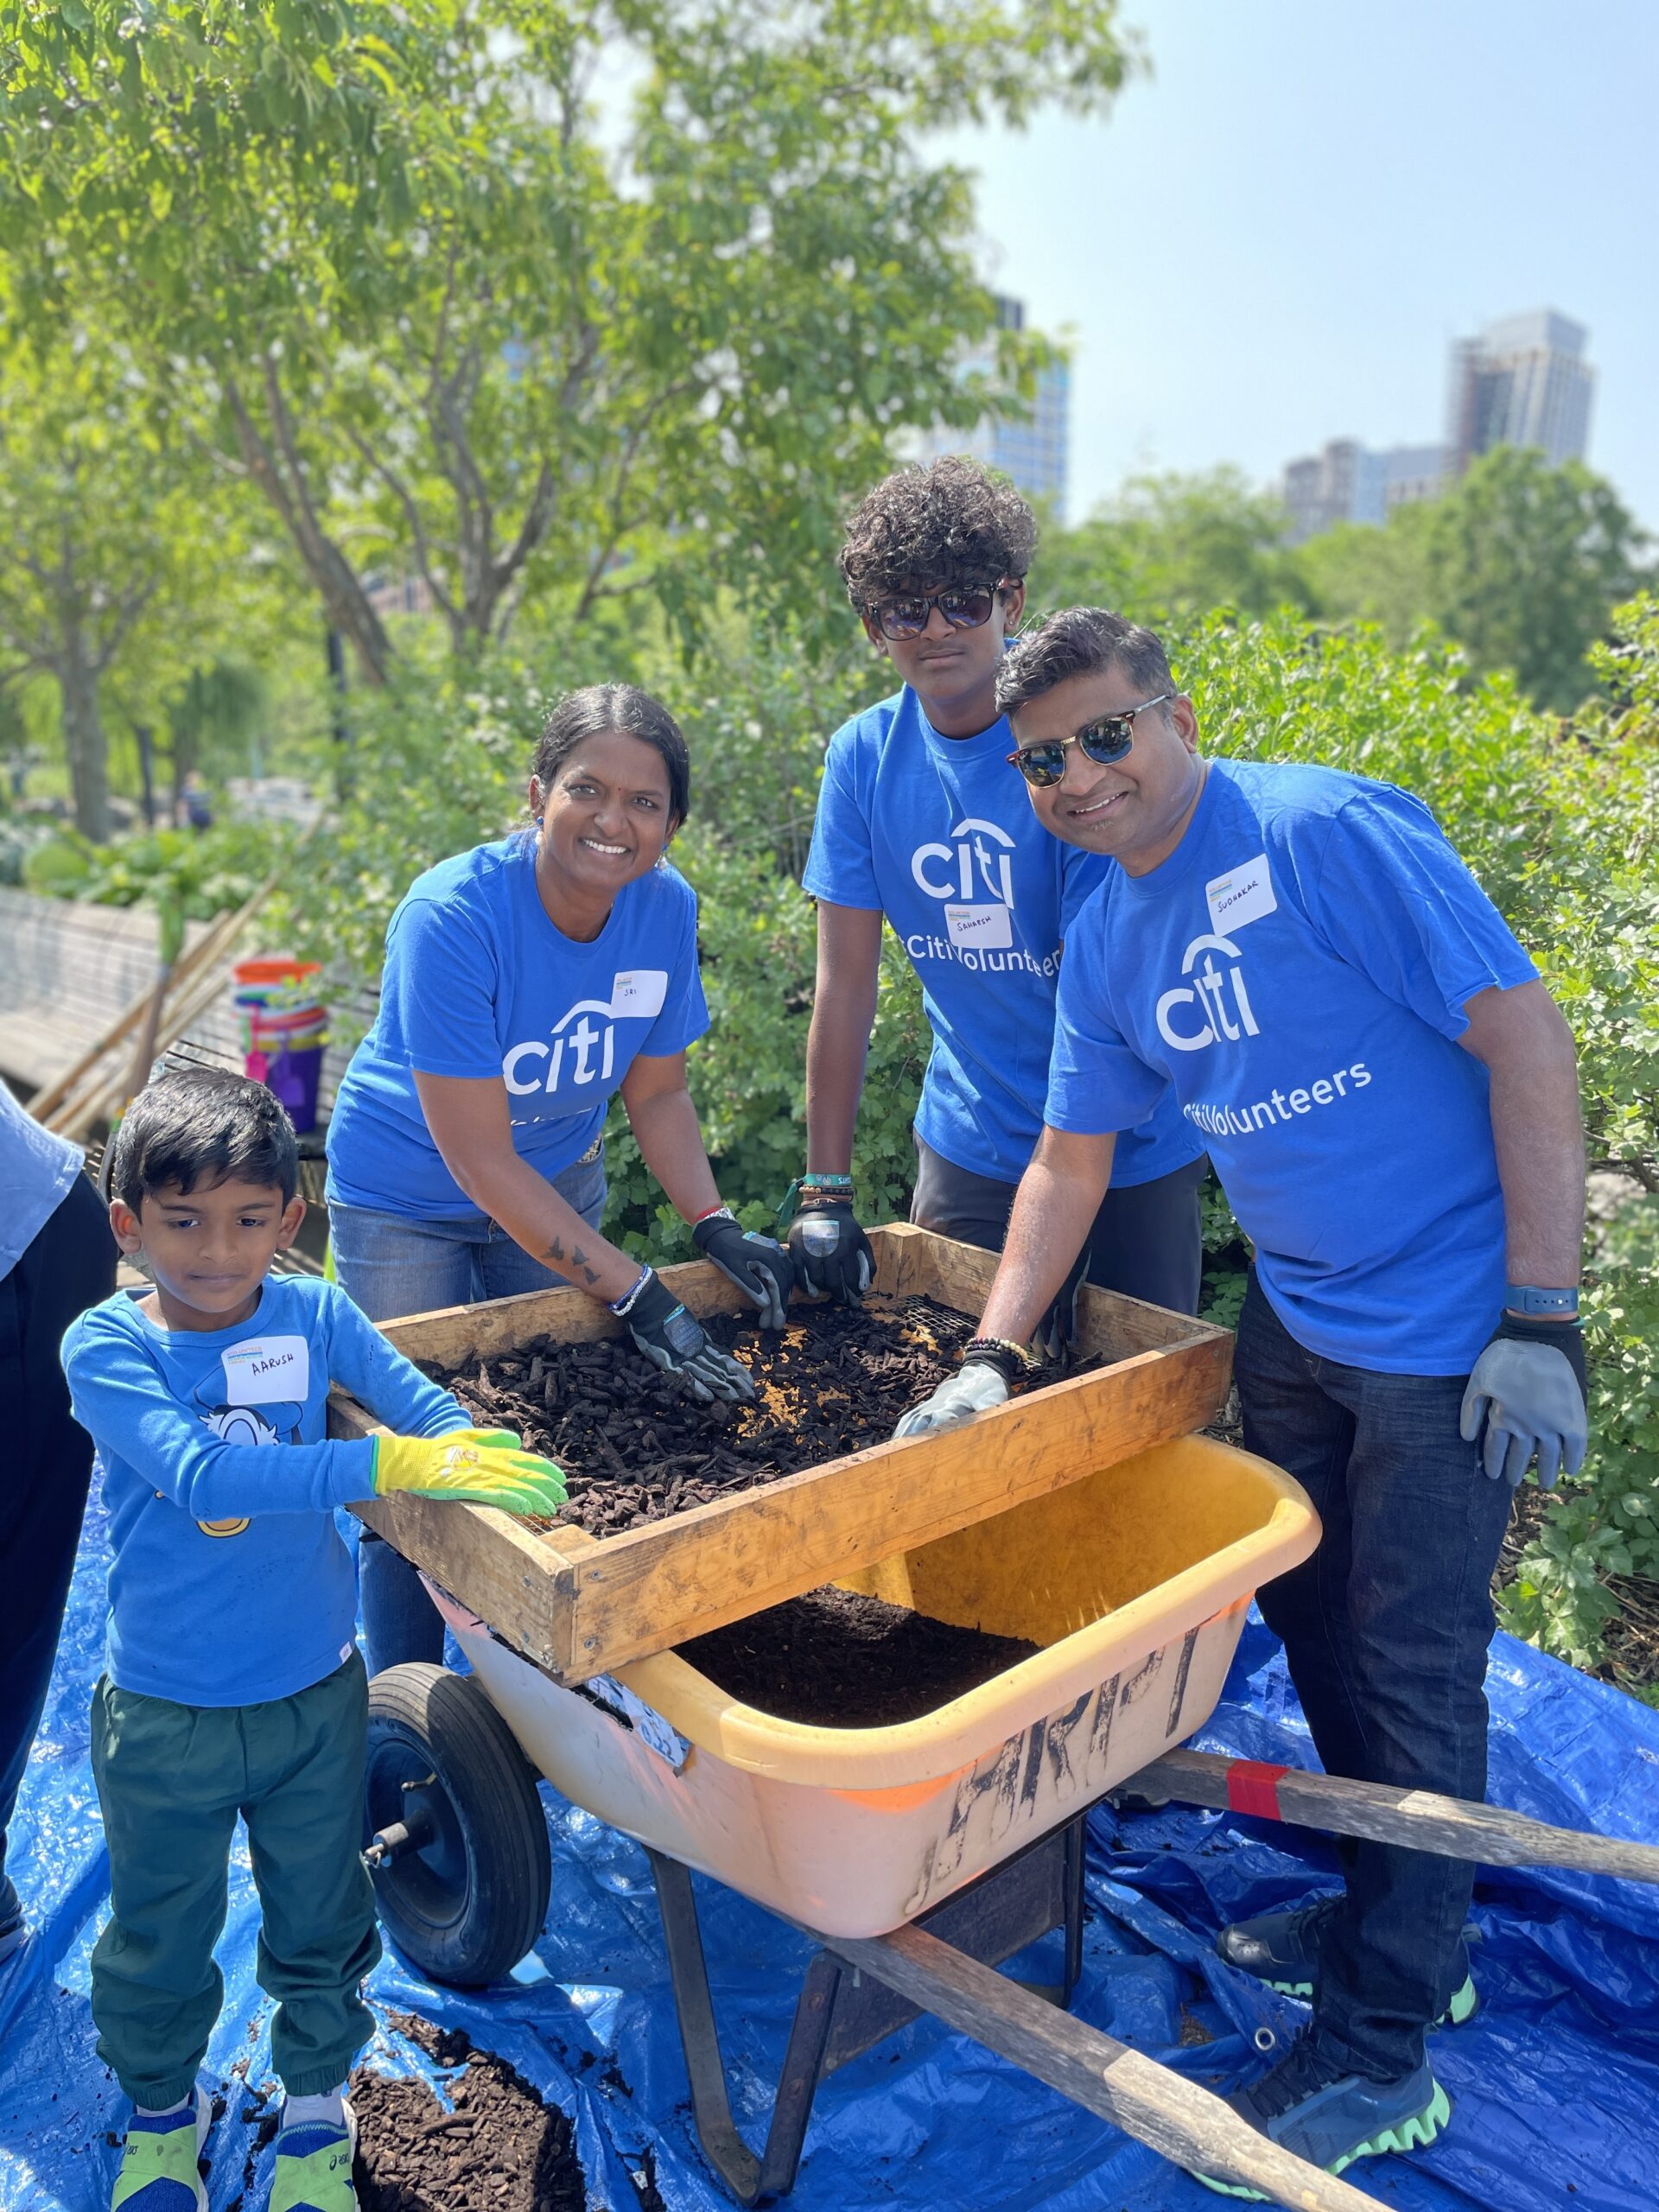 Four volunteers from Citi sifting mulch into a wheelbarrow